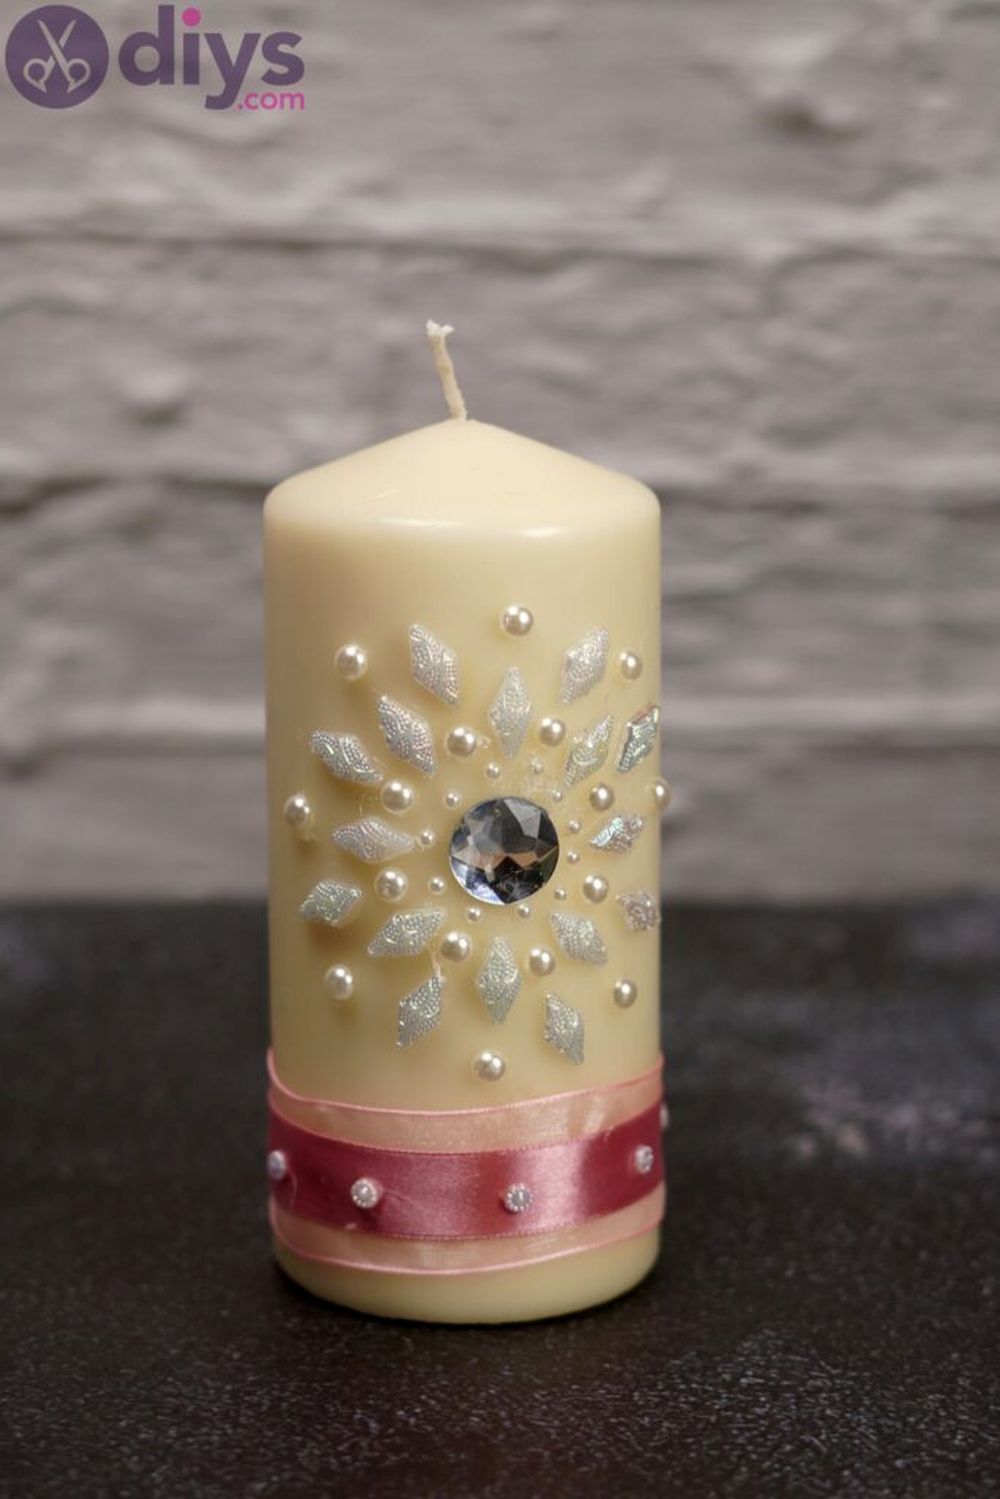 Diy candle art best gifts for women